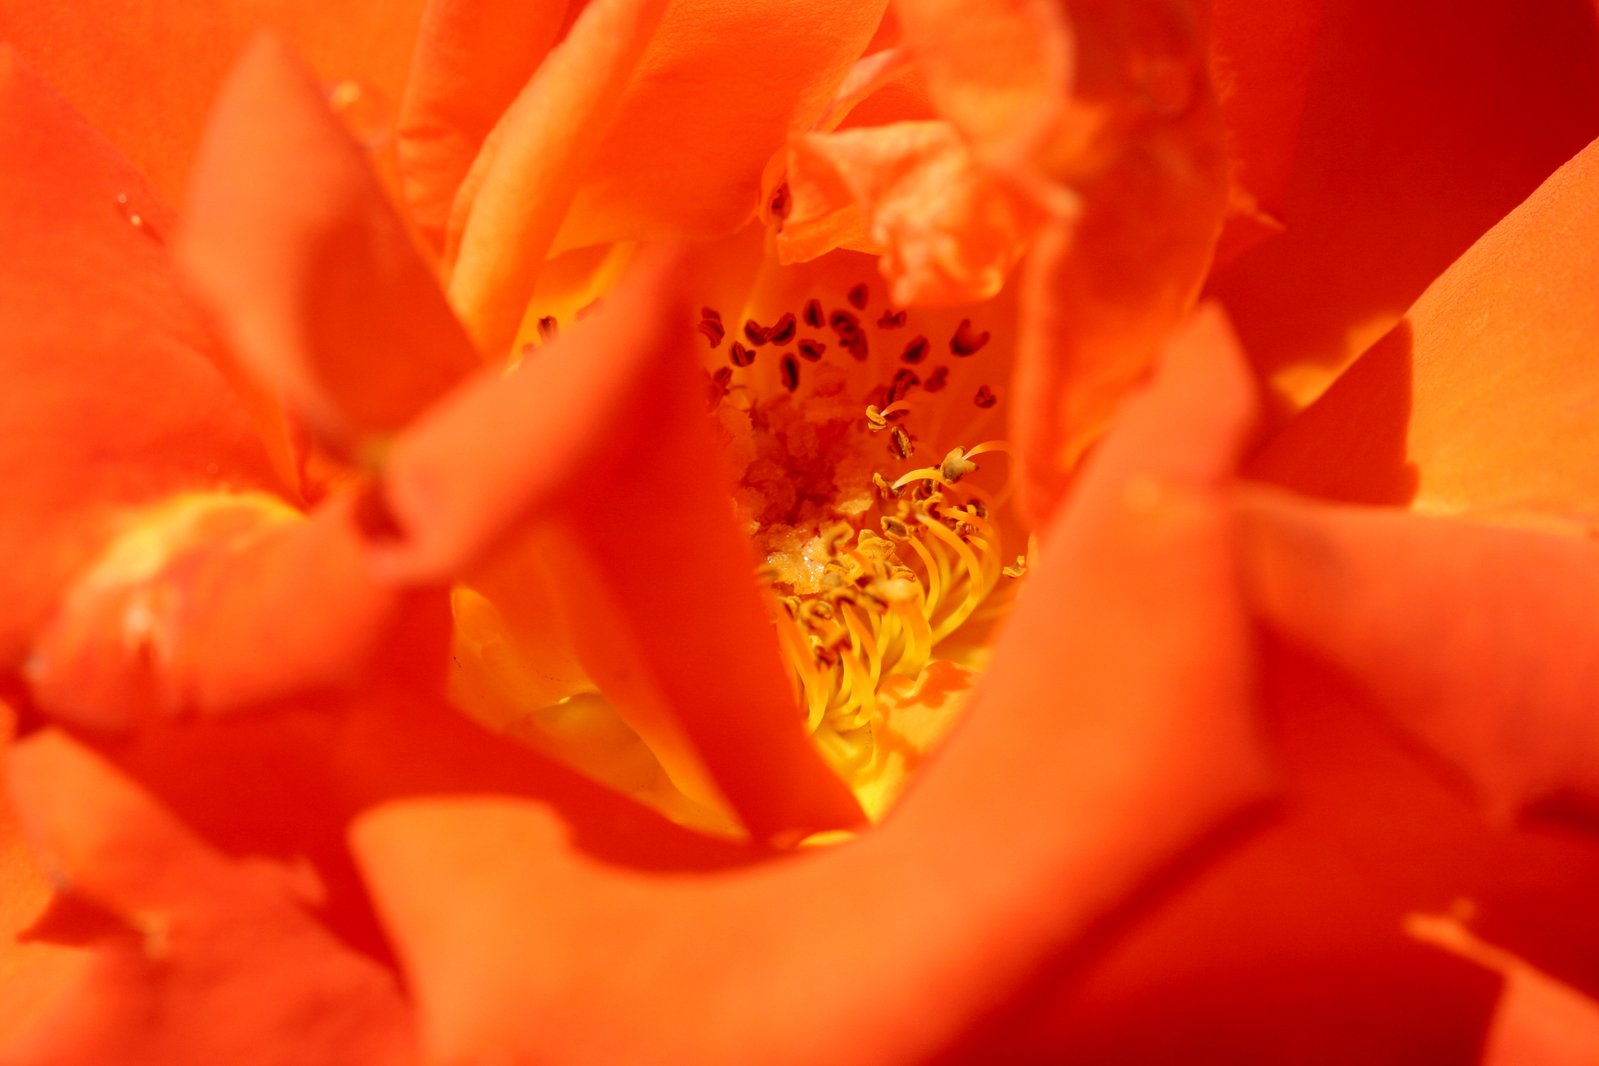 a close up image of some orange flowers